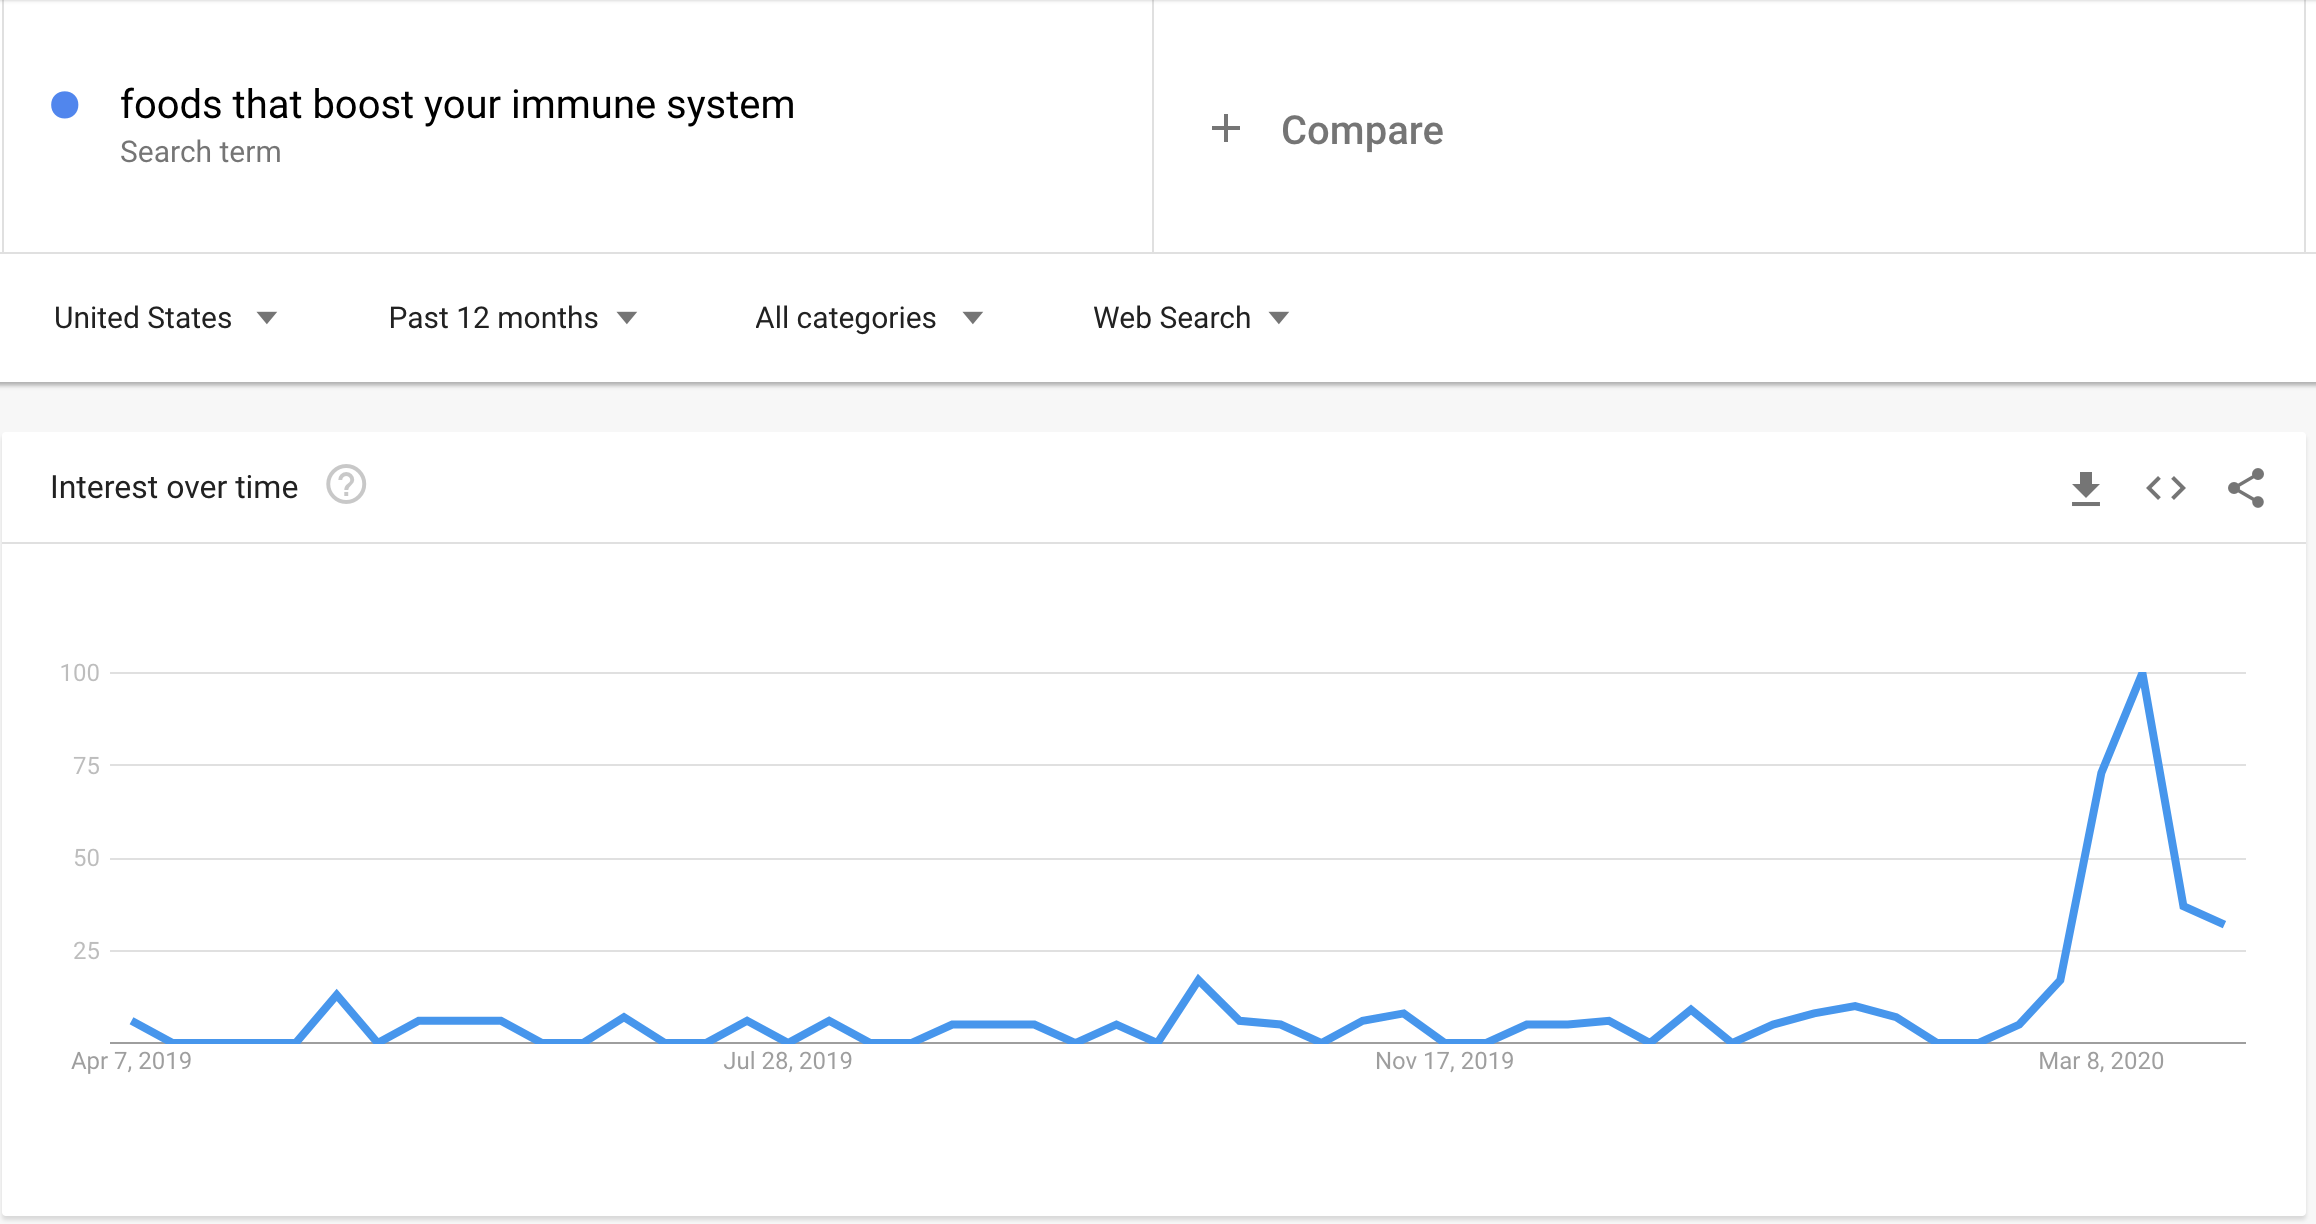 Google Trends data showing a spike in searches for “foods that boost your immune system” in March 2020.